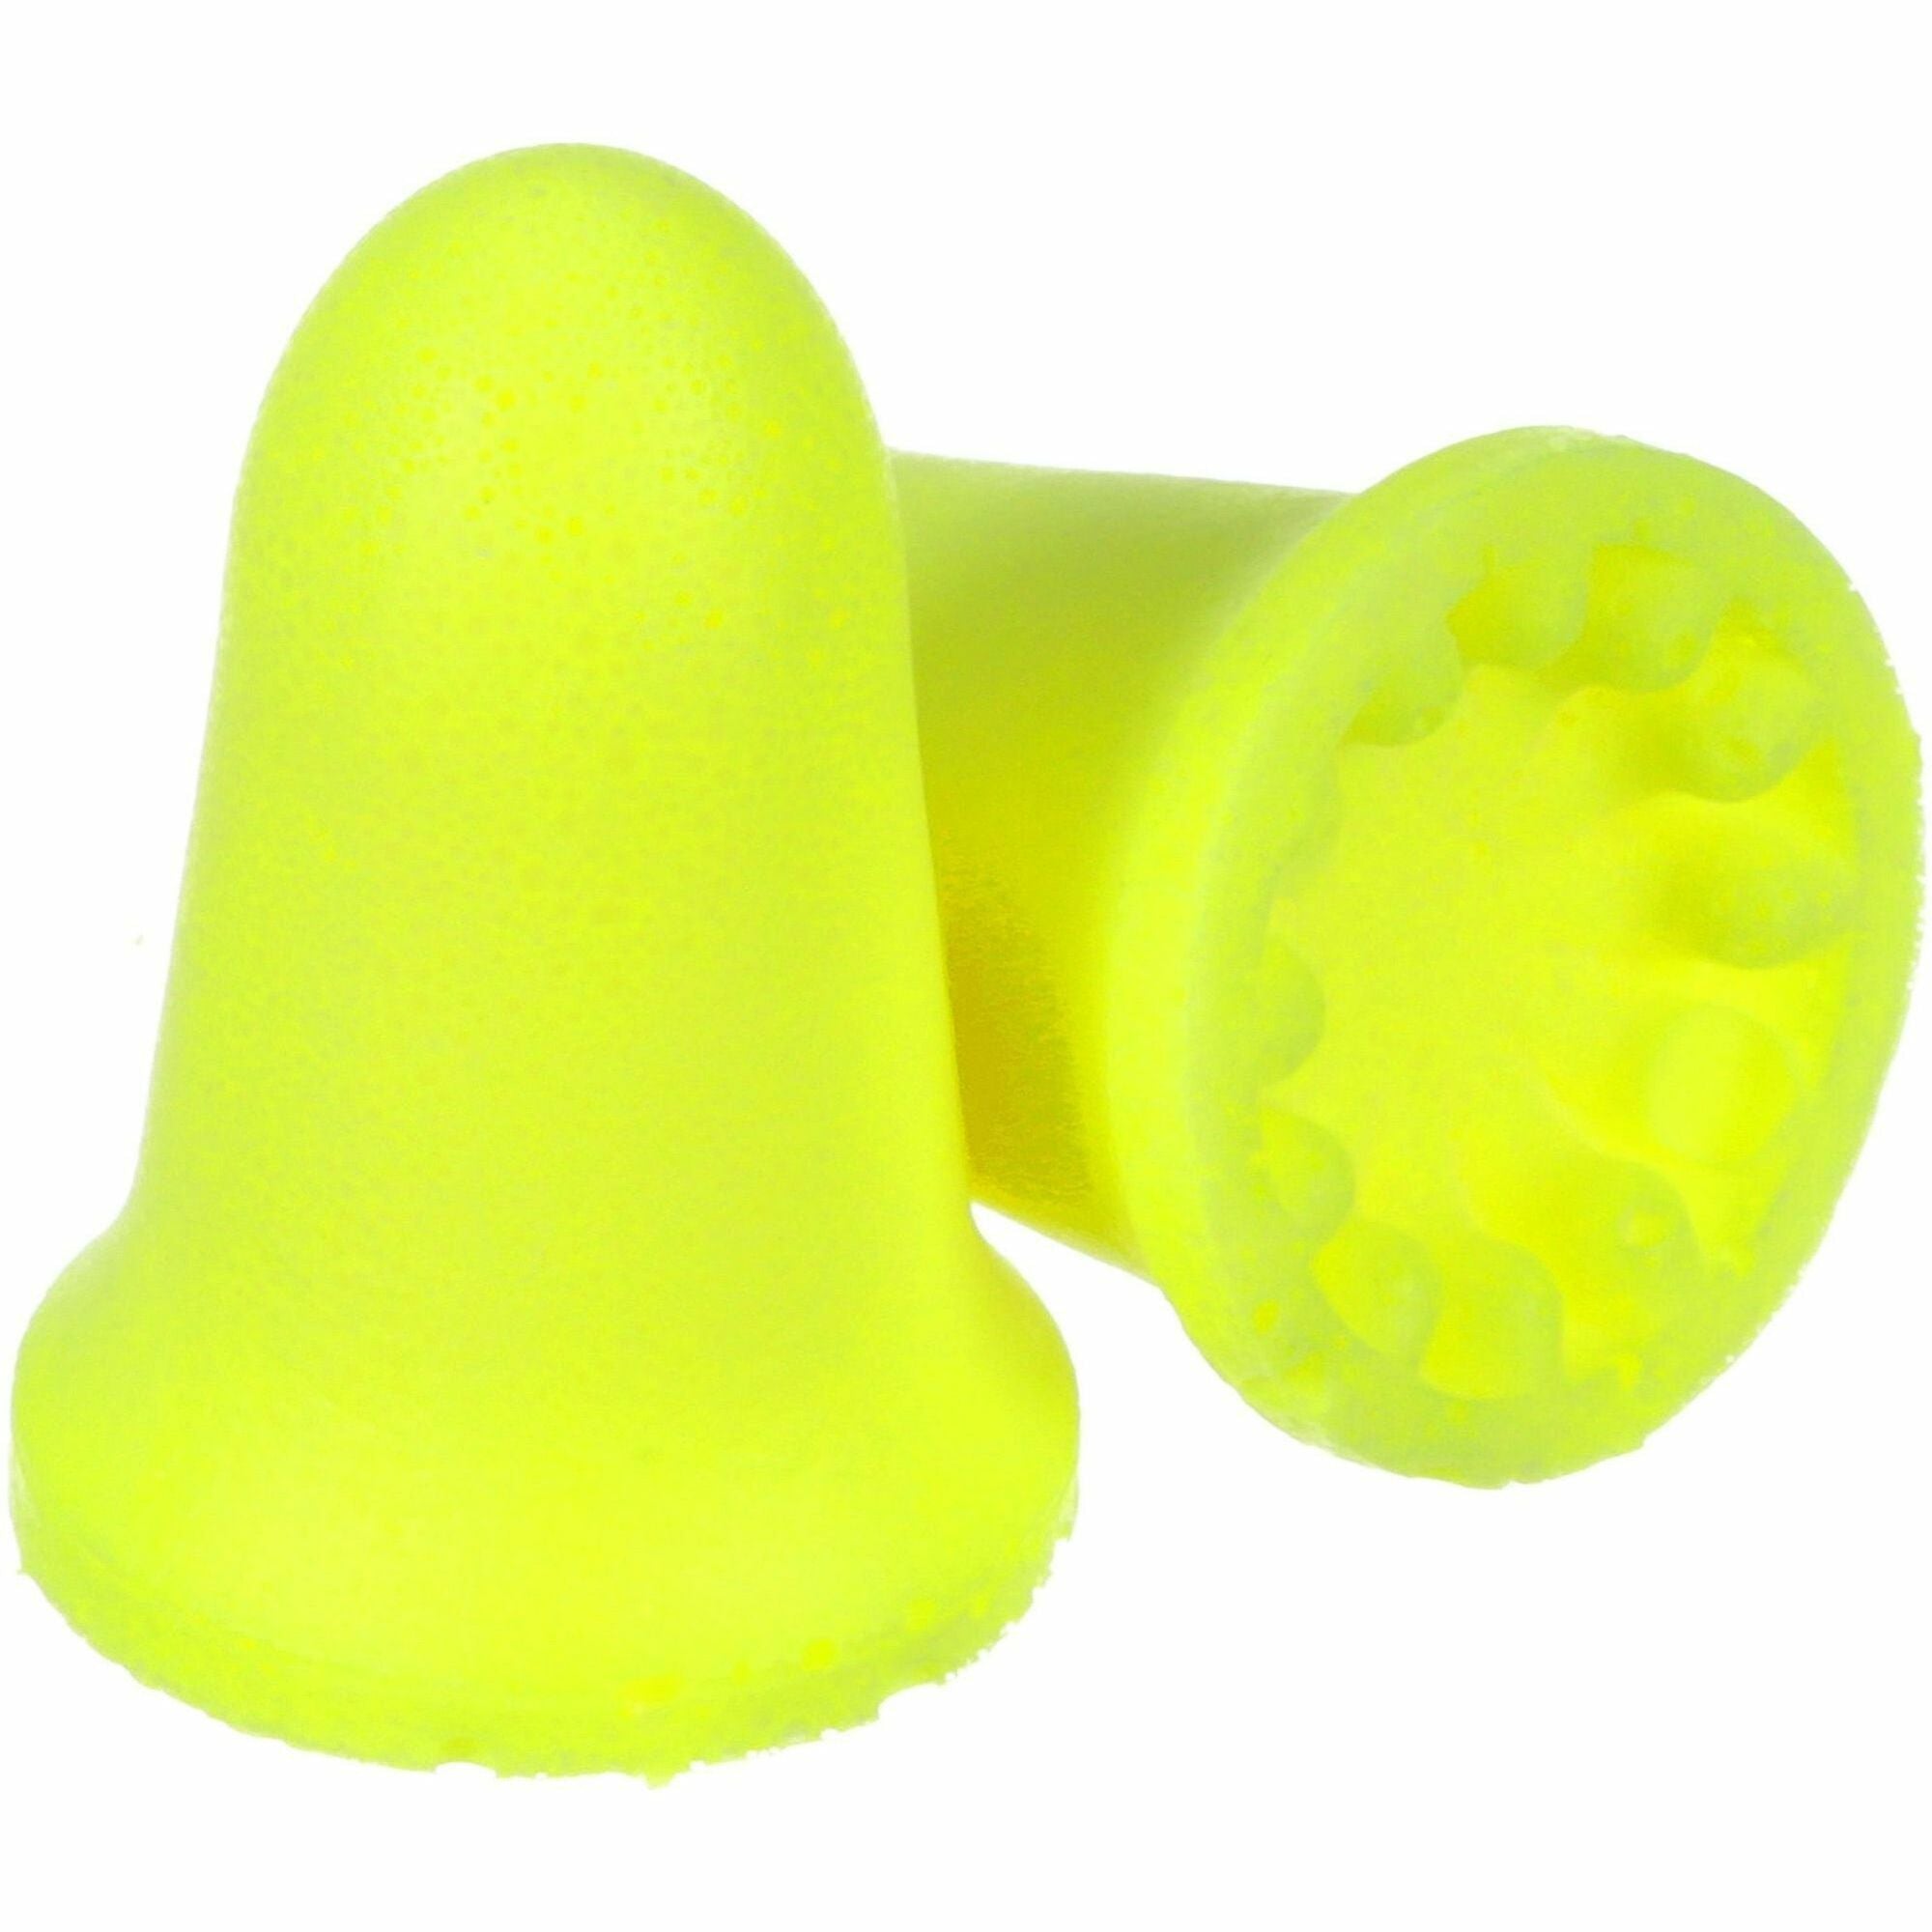 3M E-A-Rsoft FX Earplugs - Recommended for: Automotive, Manufacturing, Military, Maintenance, Repair, Mining, Oil & Gas, Pharmaceutical, Transportation, Industrial - 33 - Noise Reduction Rating Protection - Yellow - Uncorded - 10 / Carton